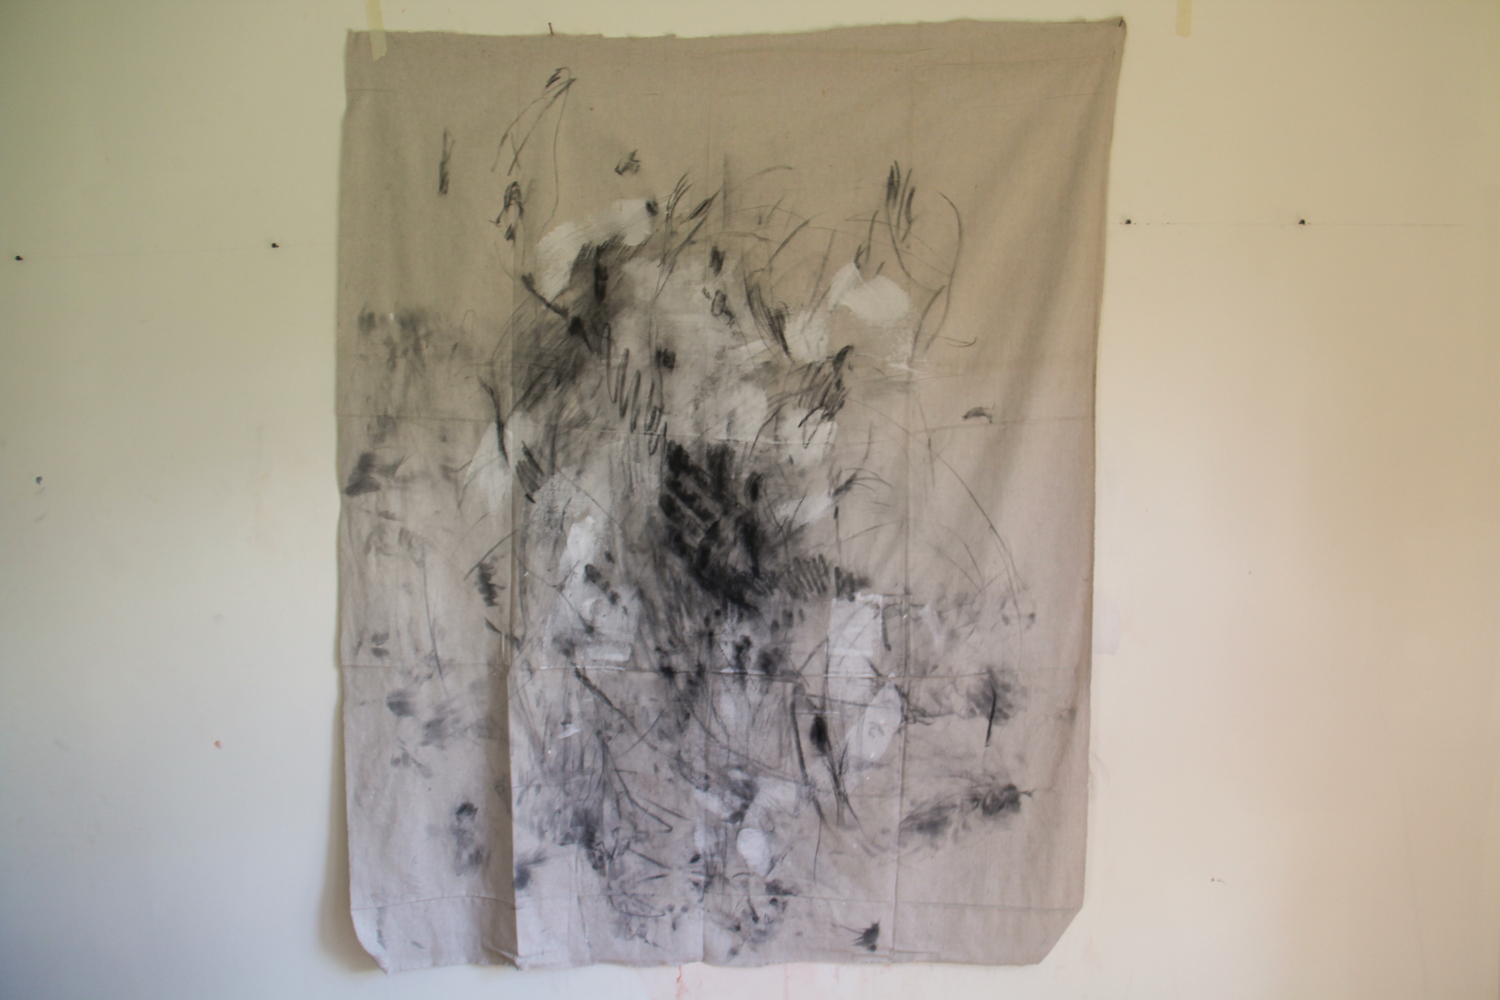 Fragmented figurative black and white charcoal drawing on fabric, one hand is visible the rest of the fabric is covered in marks and smudges